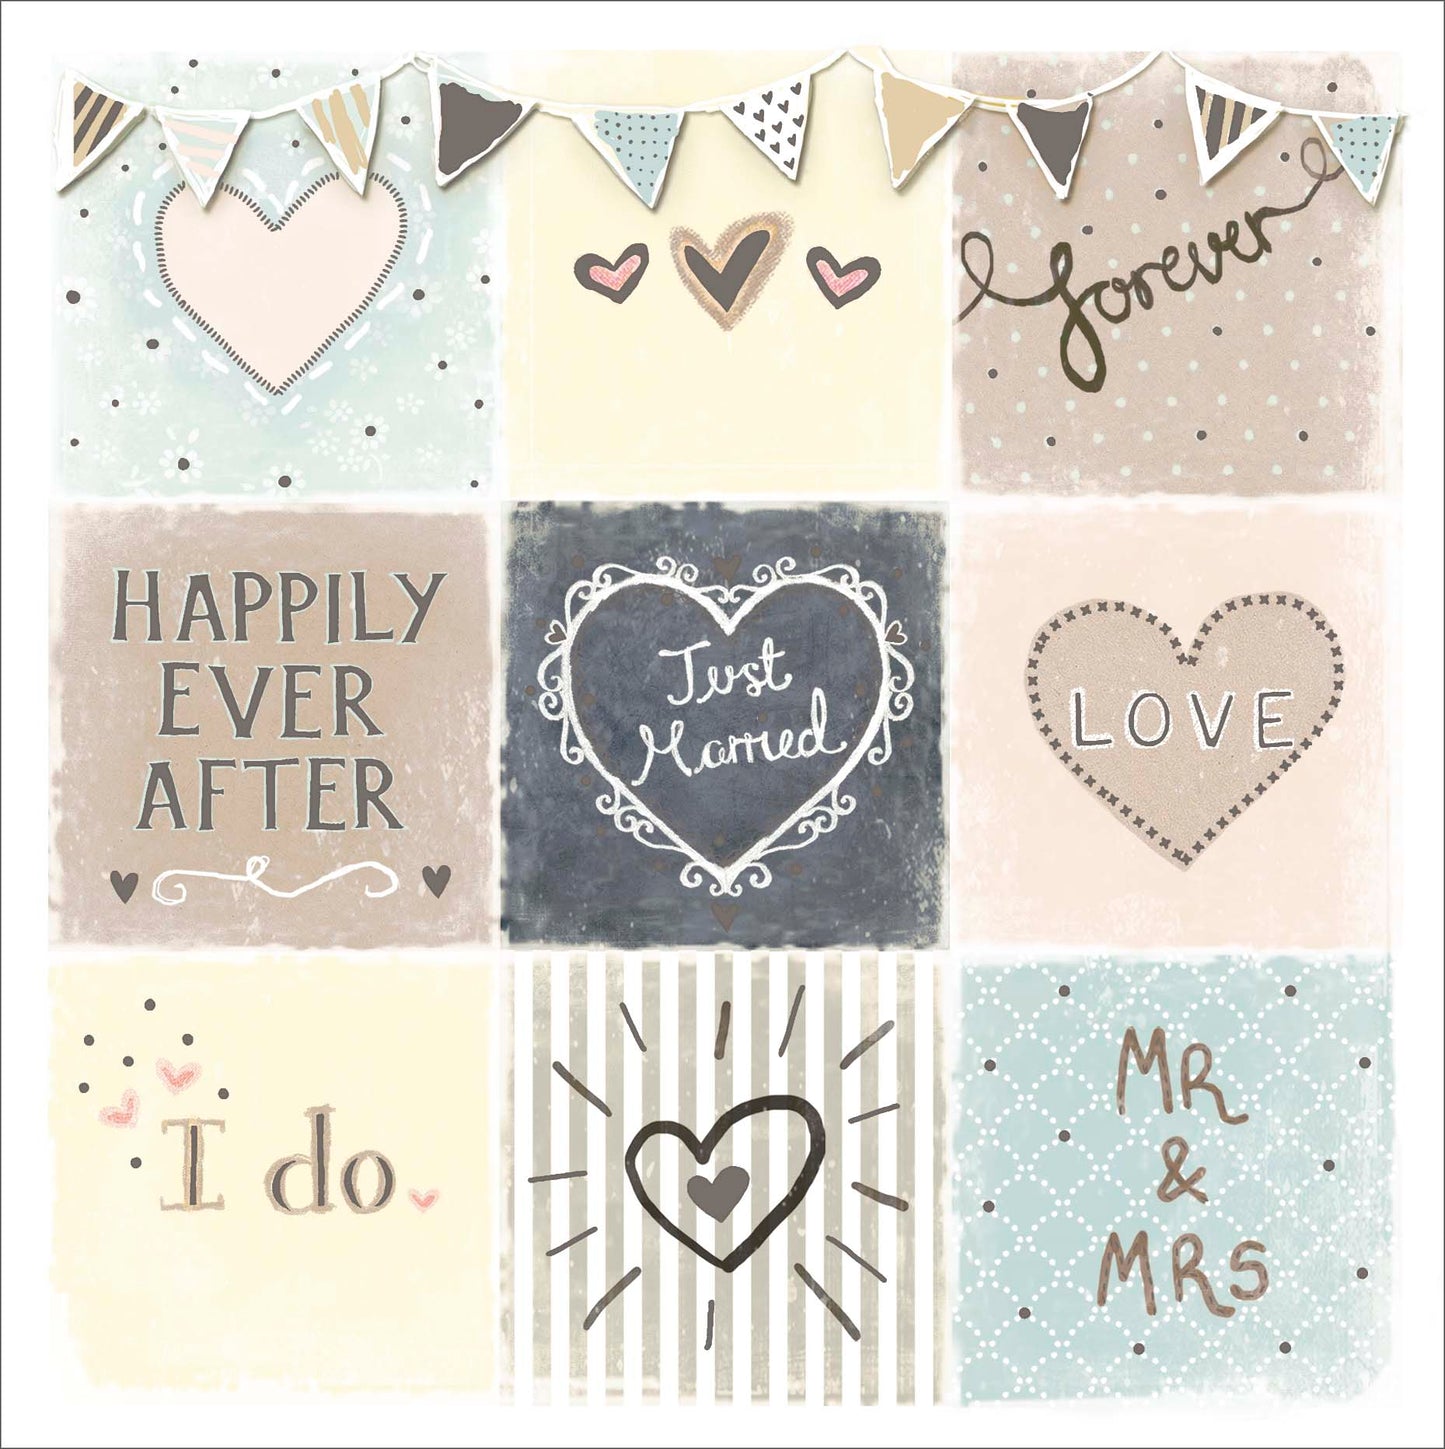 Just Married Mr & Mrs Forever Wedding Greeting Card